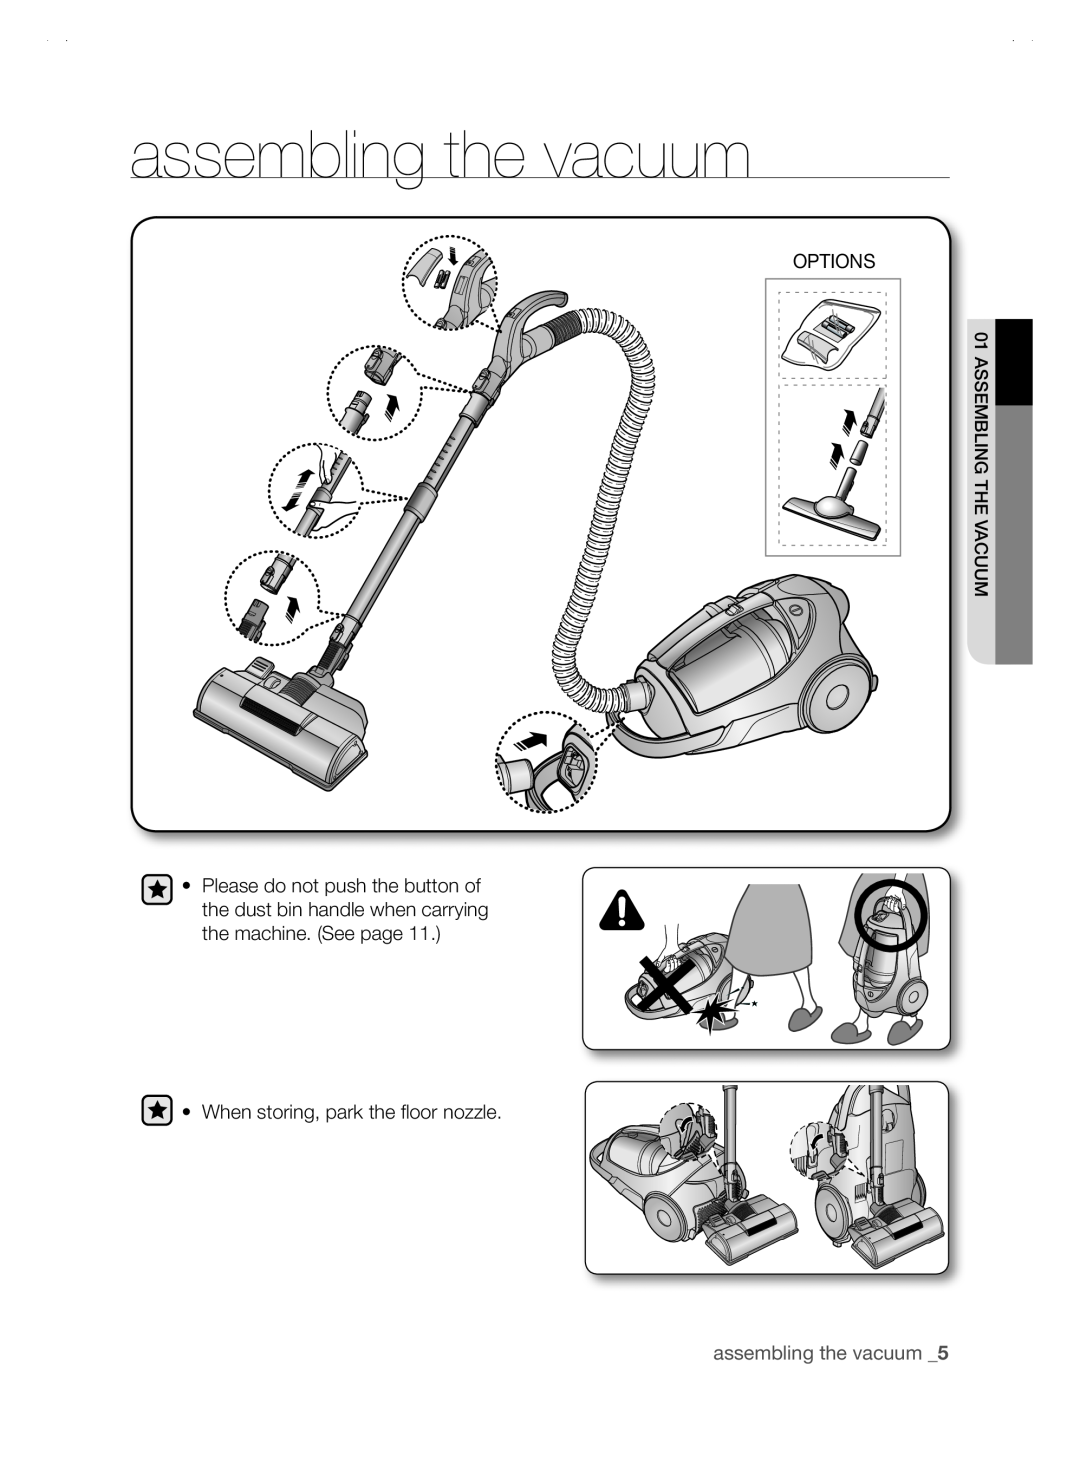 Samsung SC88P user manual assembling the vacuum _5, Options, • When storing, park the floor nozzle 